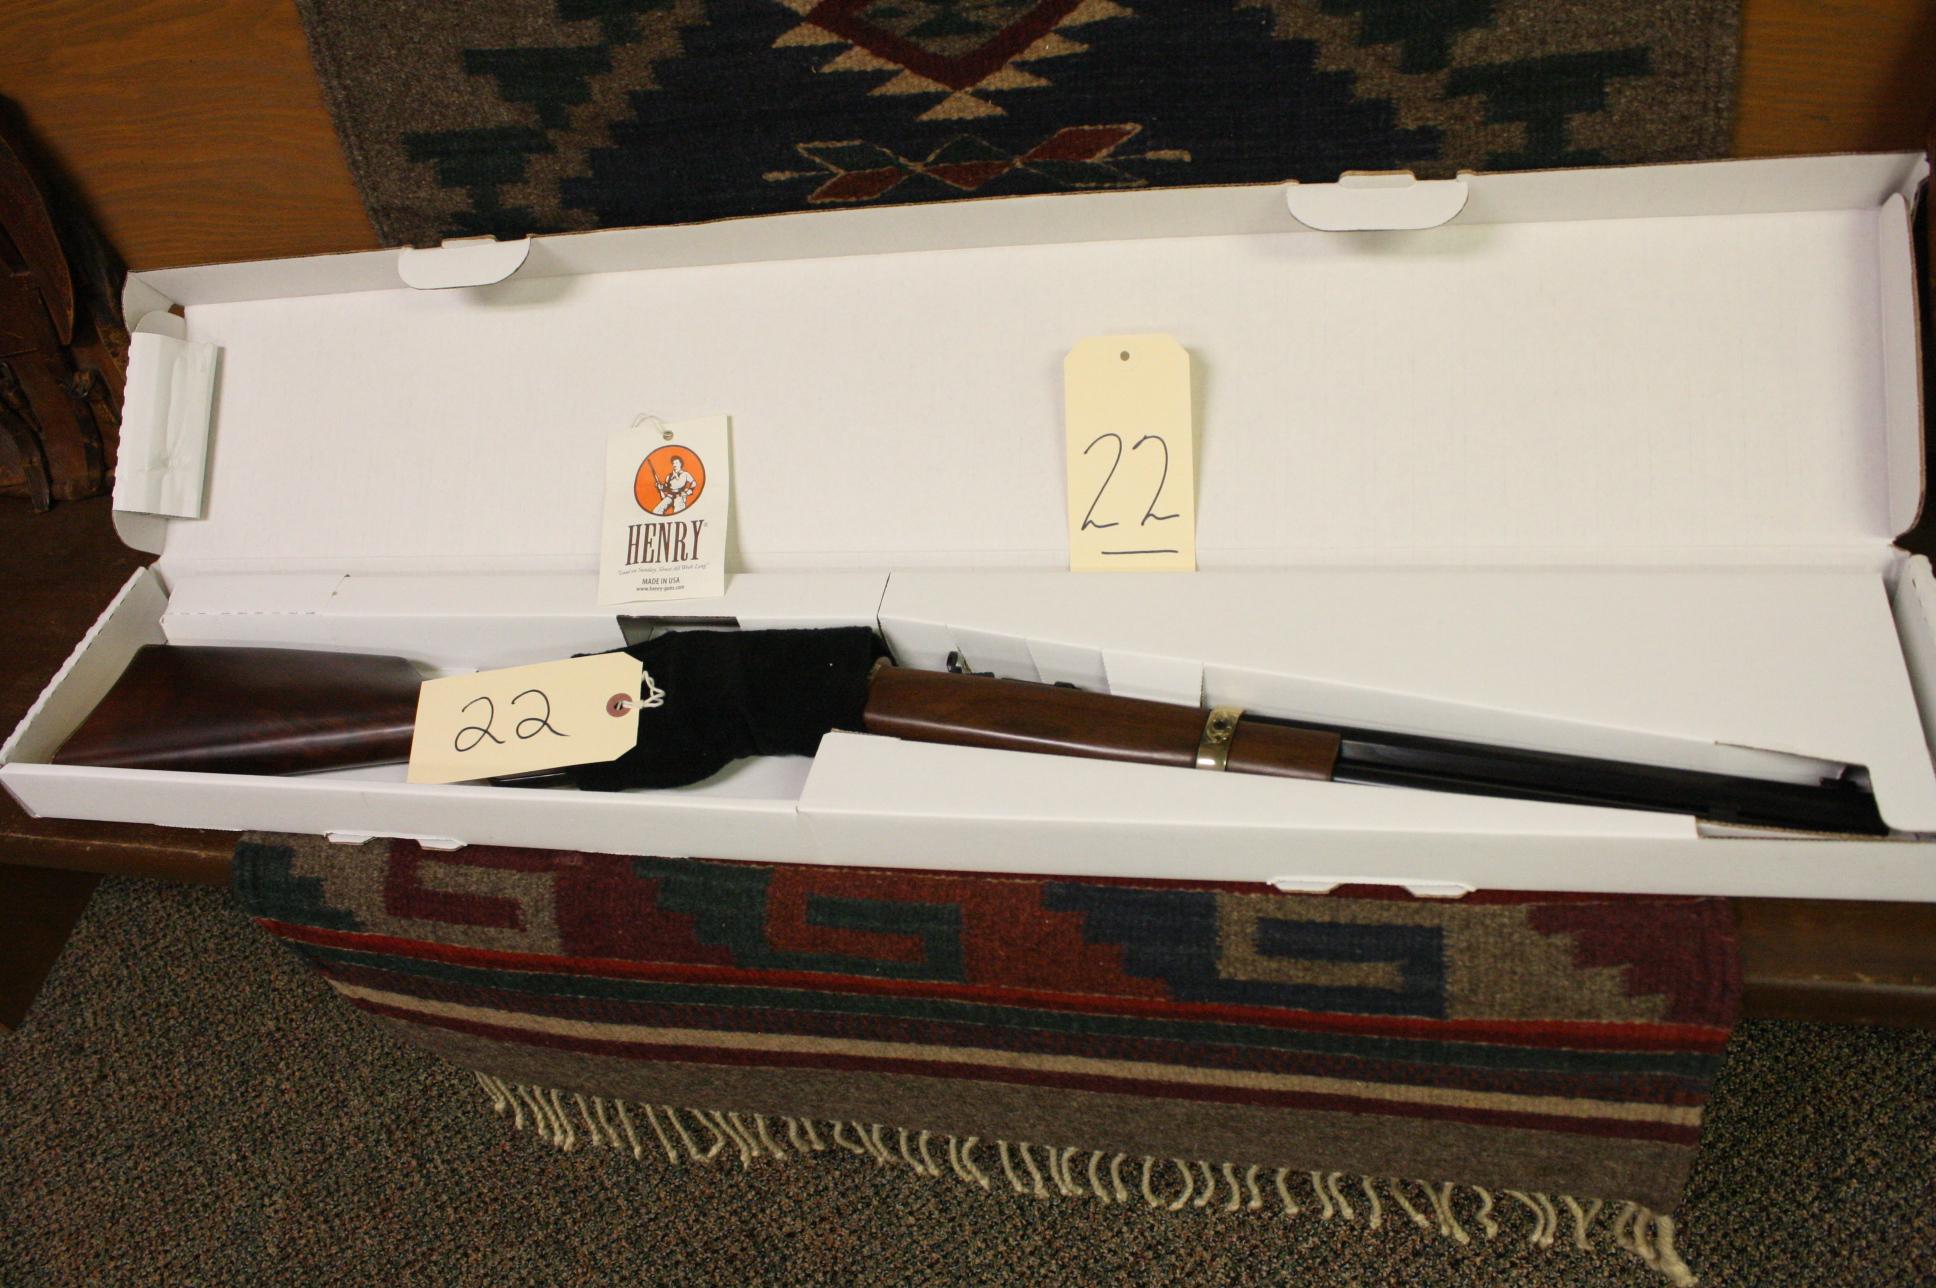 HENRY BIG BOY DELUXE, MODEL H006DD, 44 MAG/SPL LEVER ACTION RIFLE